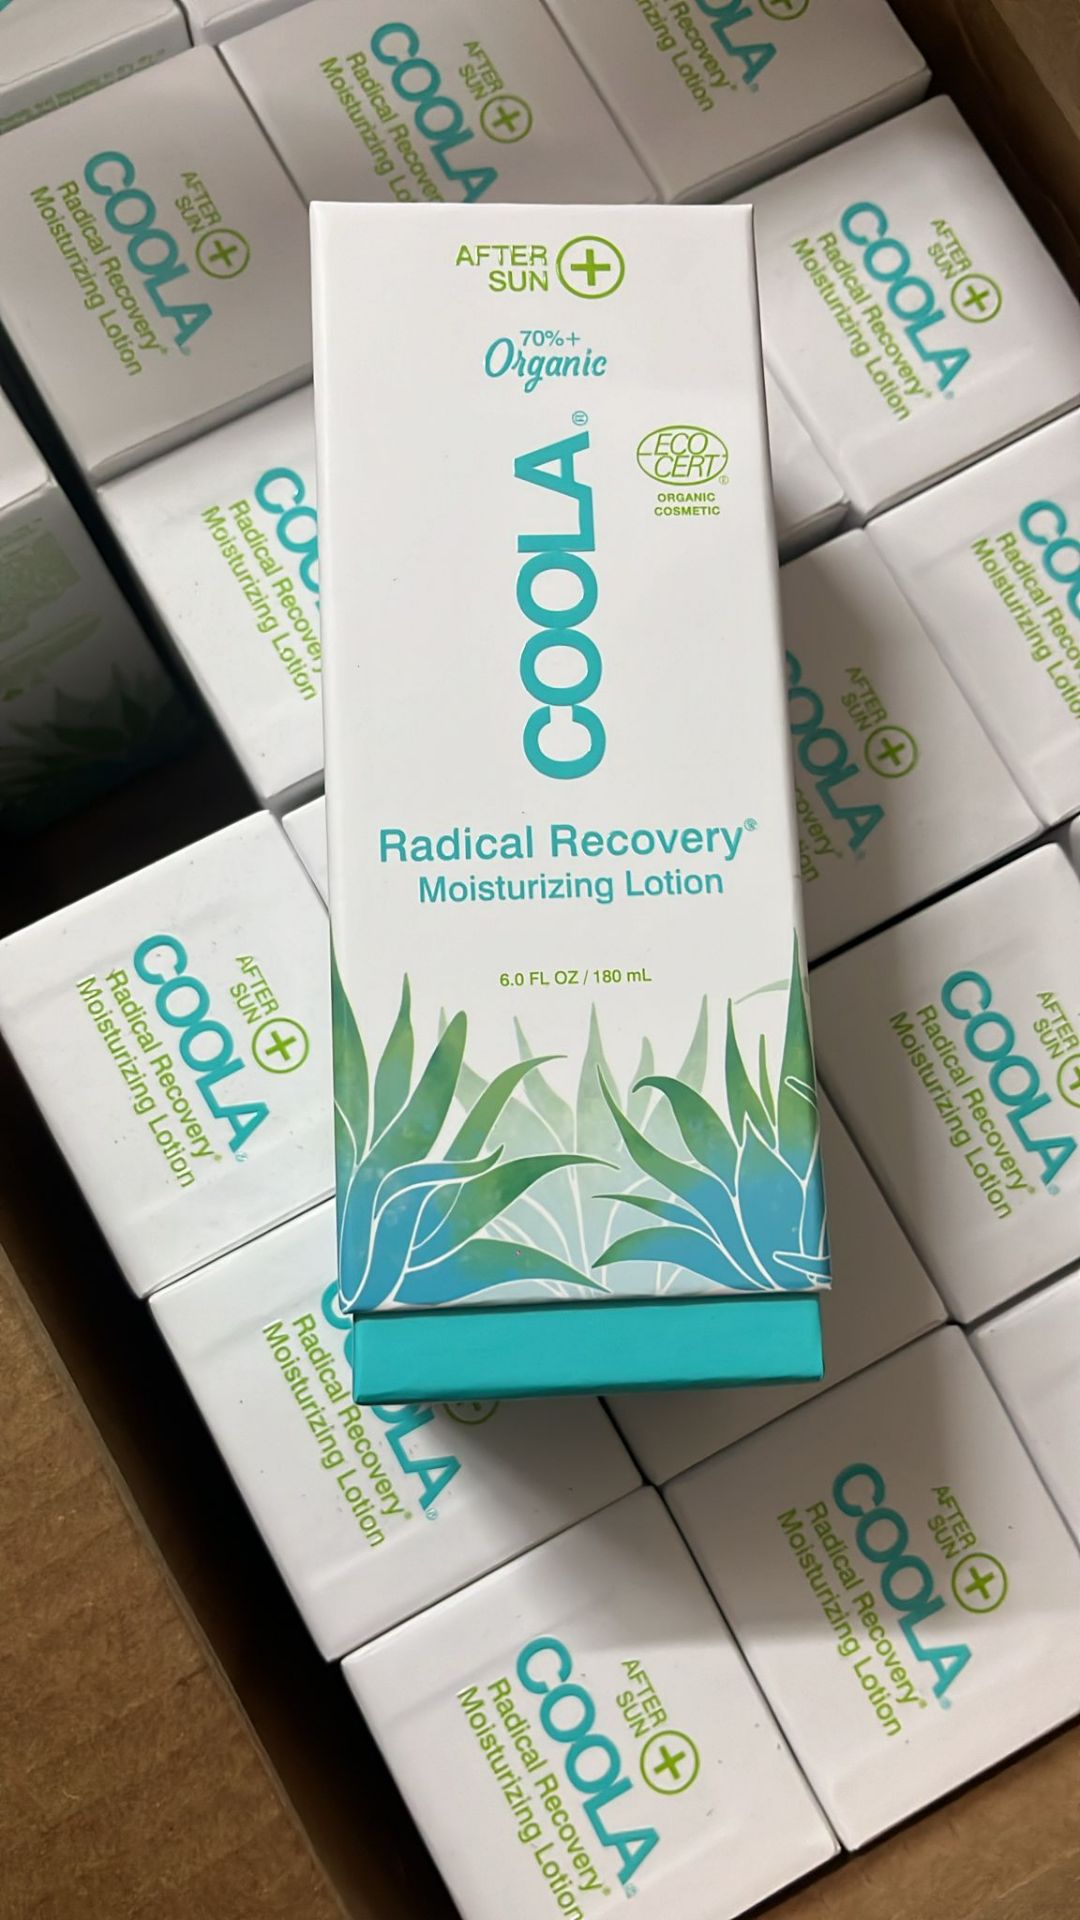 Coola Radical Recovery Aftersun x22, Est retail value £770